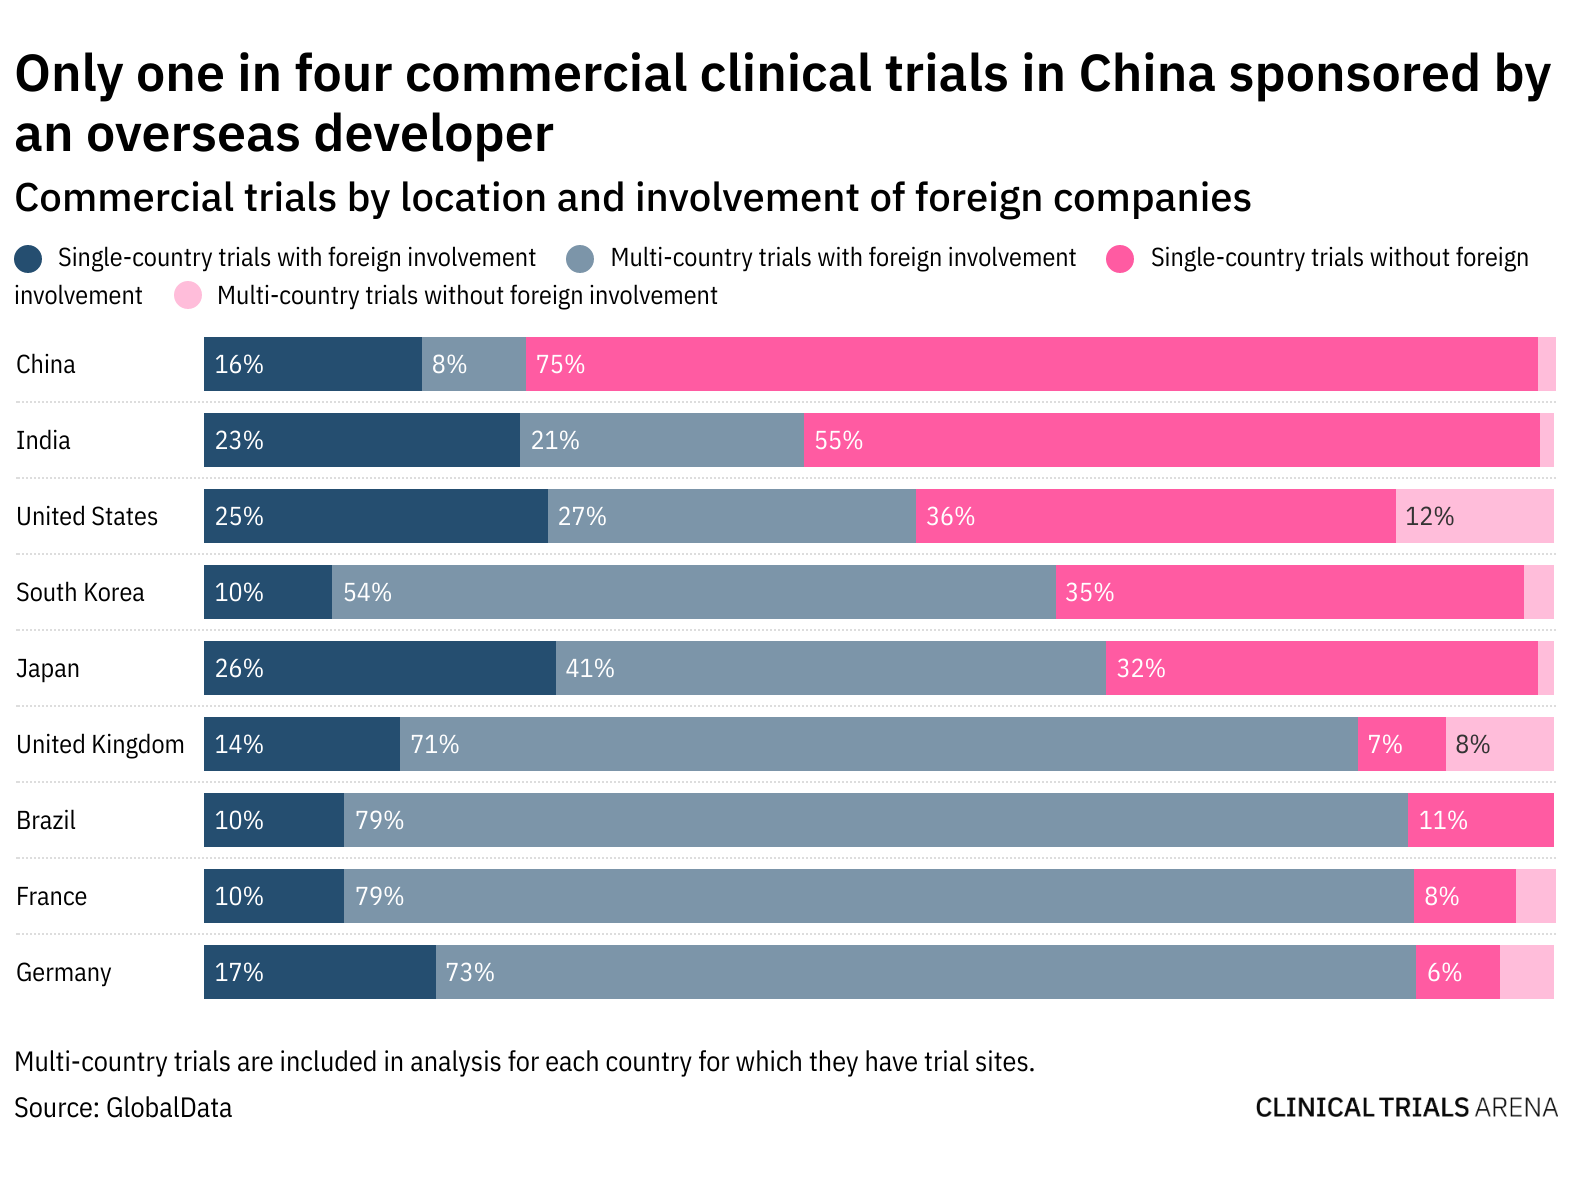 The great wall: why overseas sponsors are yet to fully tap into China’s clinical trial resources